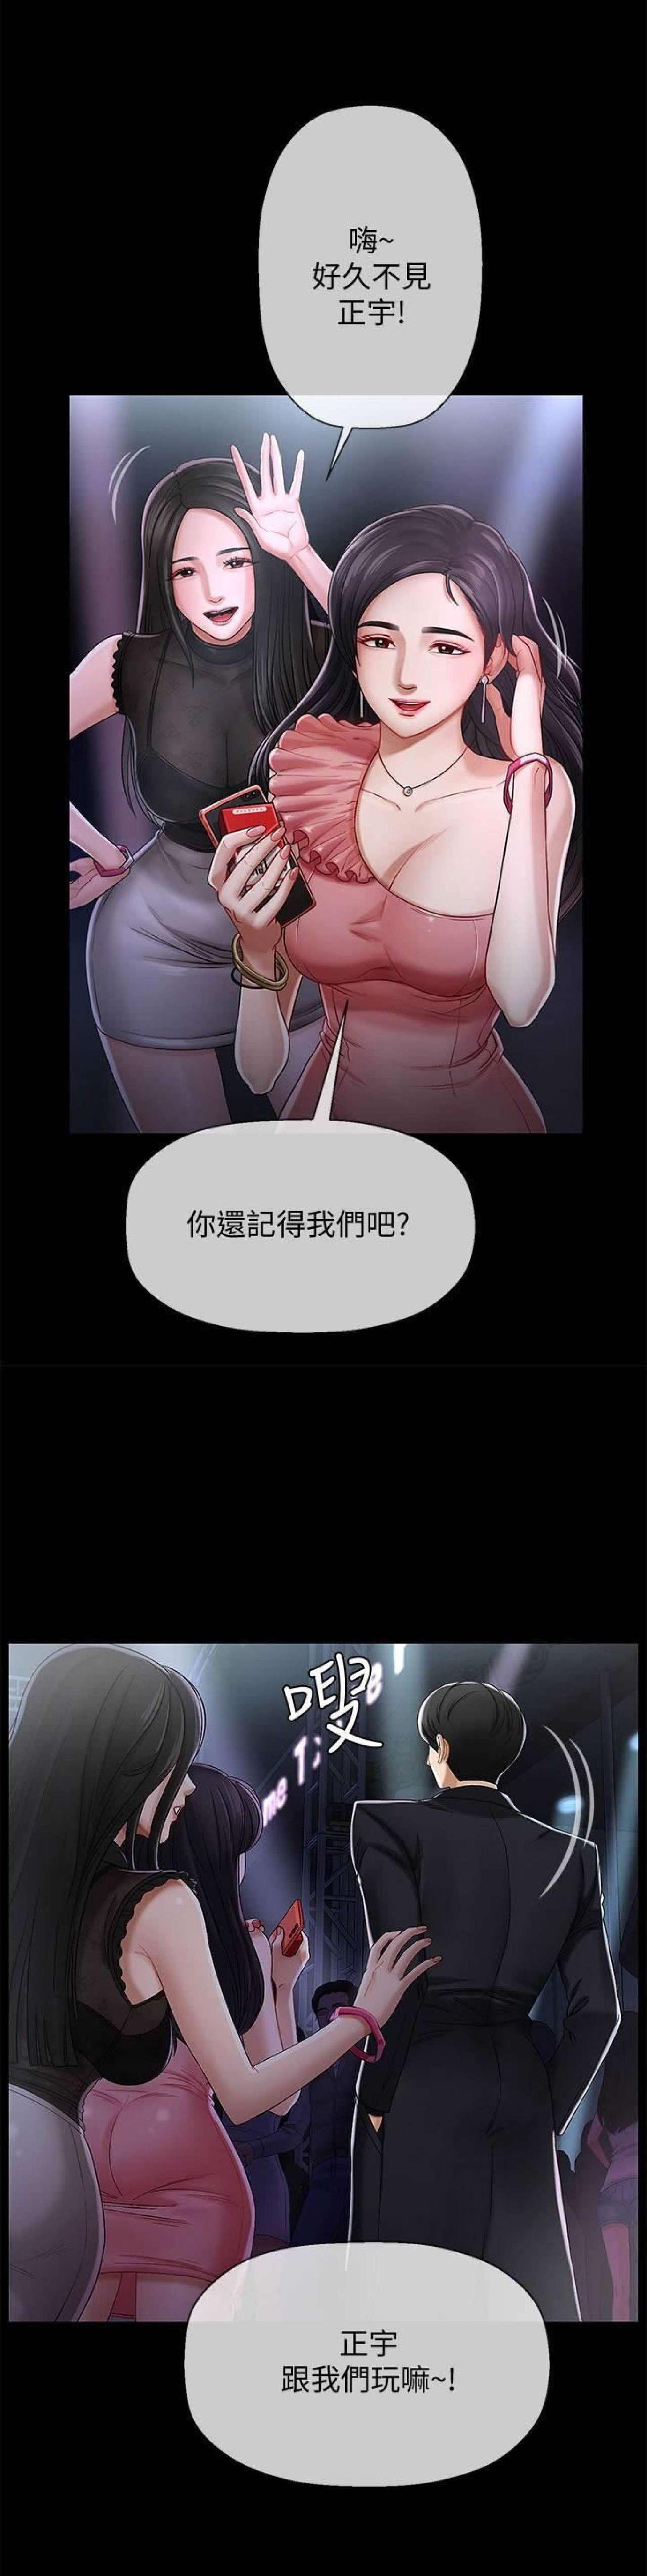 Teasing 坏老师 | PHYSICAL CLASSROOM 2 Fuck Her Hard - Page 2